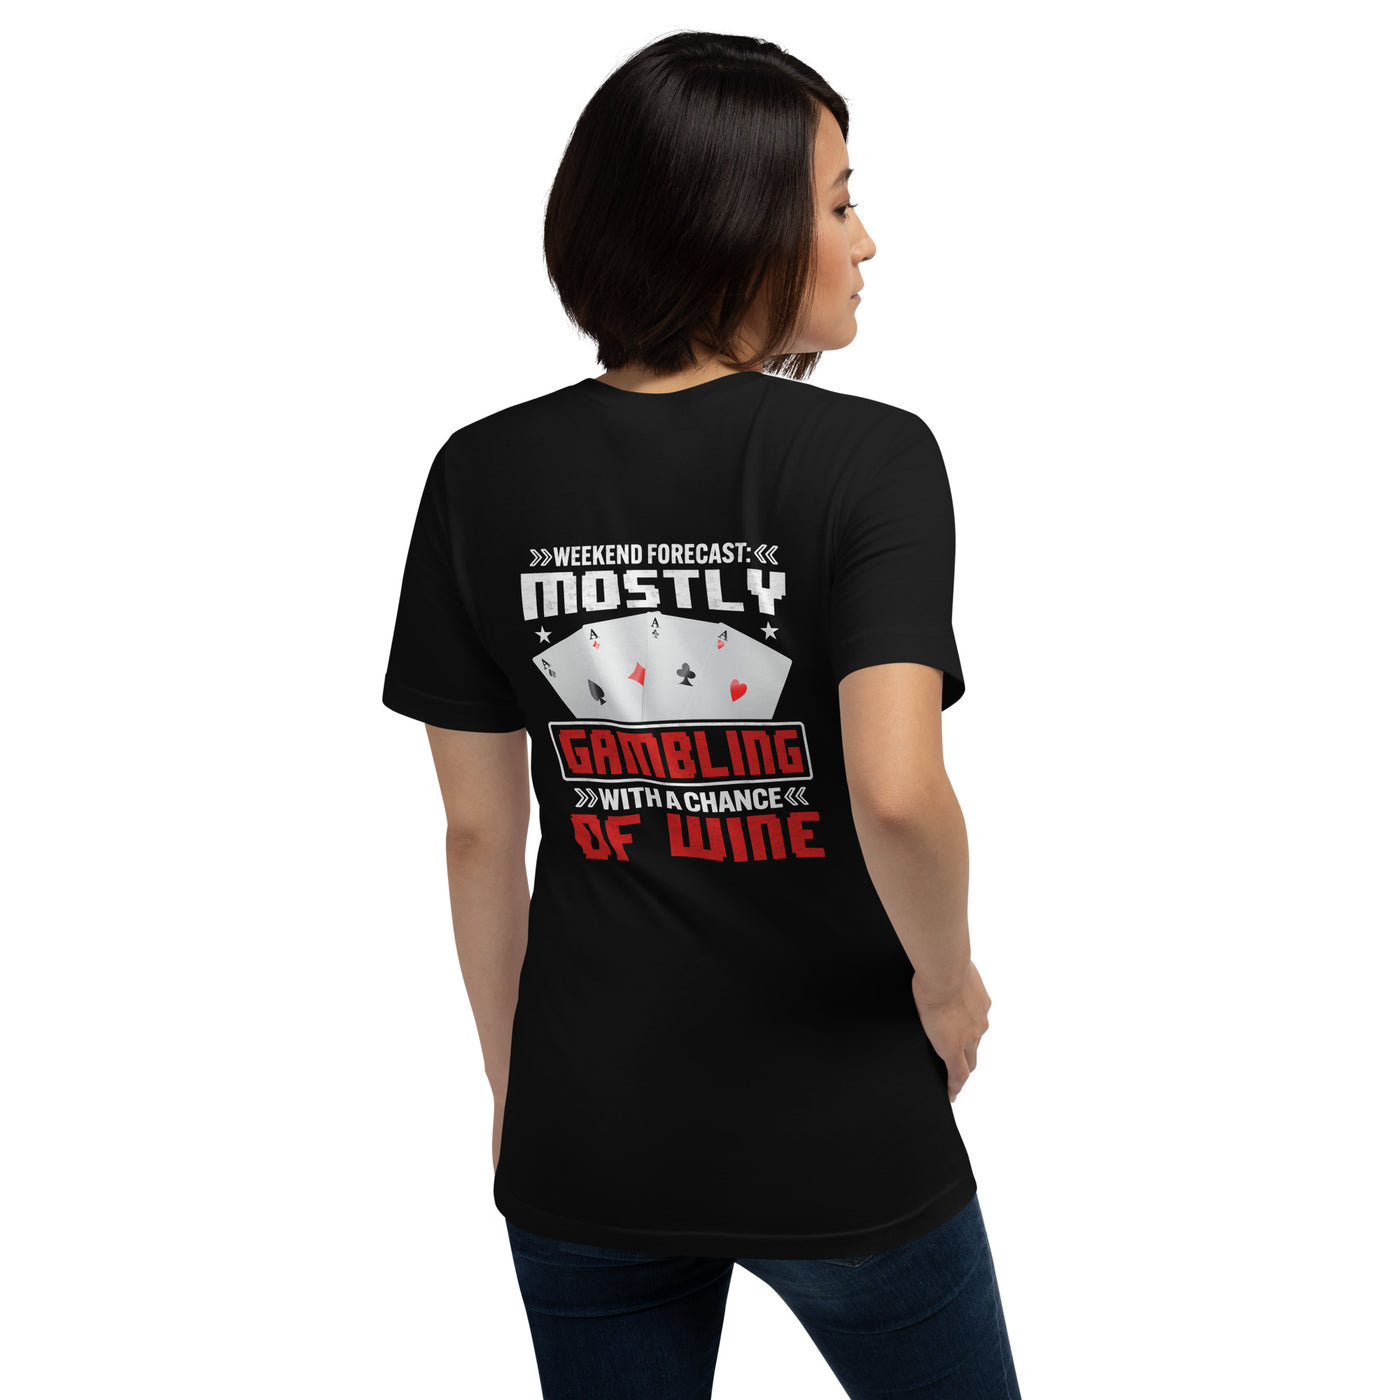 Weekend Forecast Mostly Gambling With a Chance of Wine - Unisex t-shirt ( Back Print )